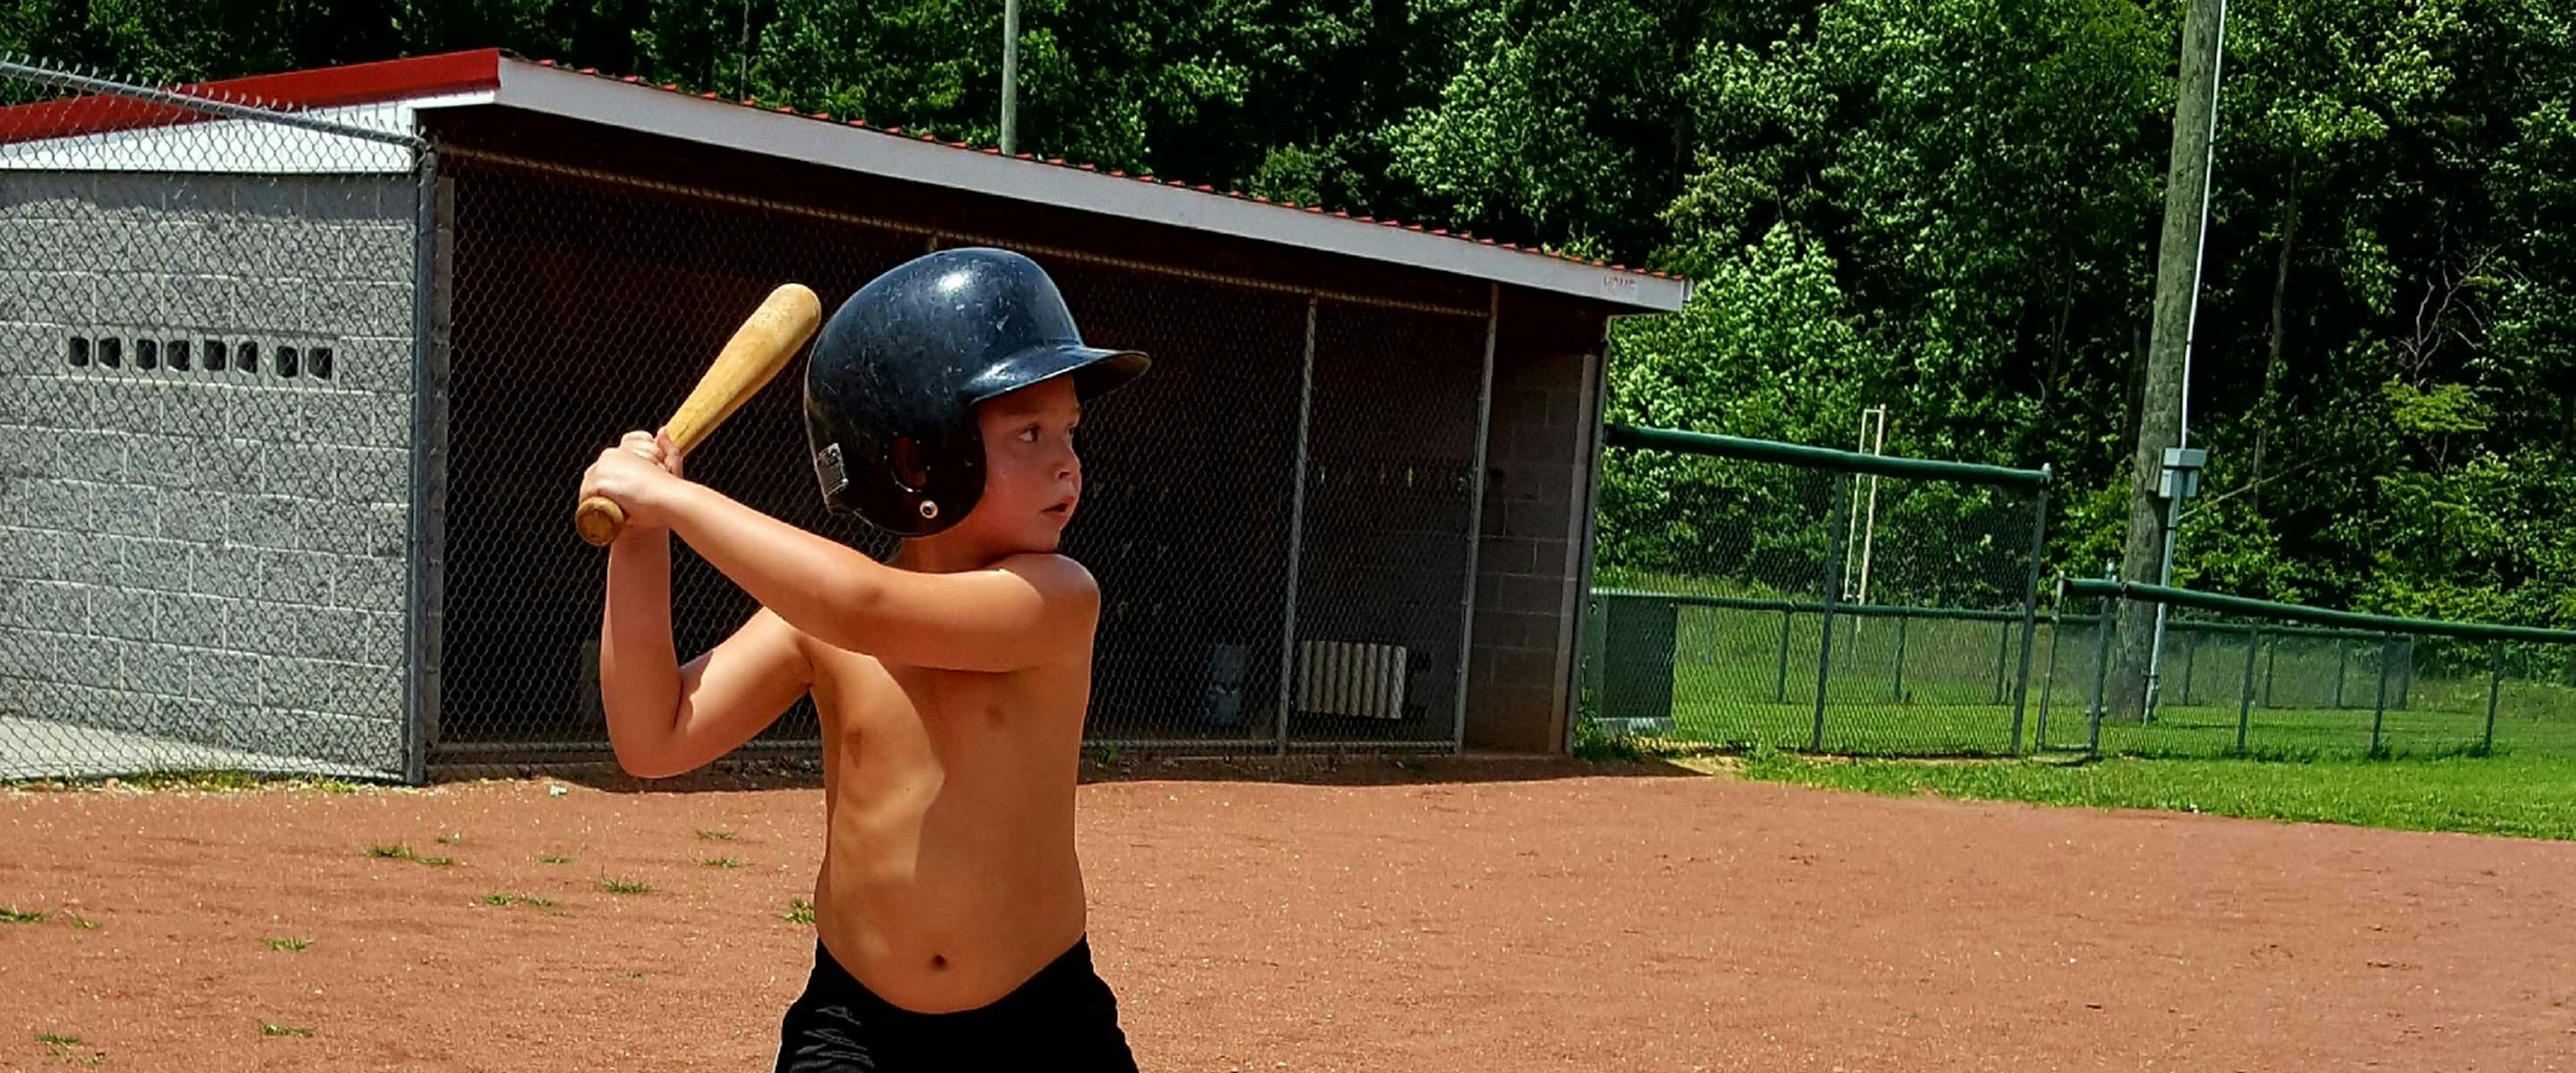 boy up to bat on home plate at ball field